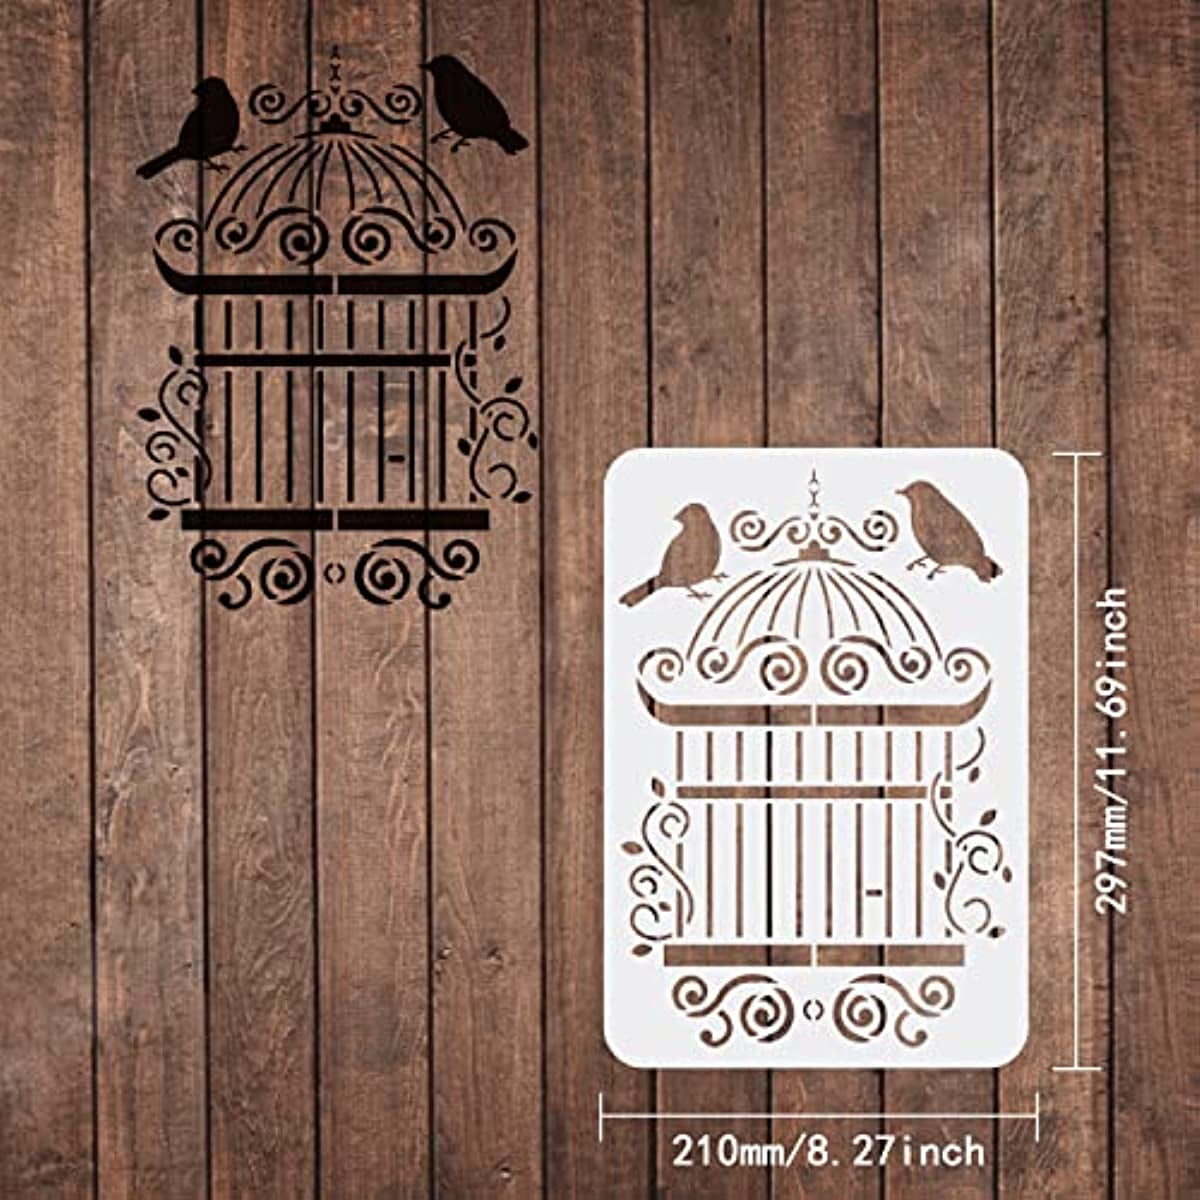 JRV Stencil welcome Home – Bird's Nest Gifts & Antiques